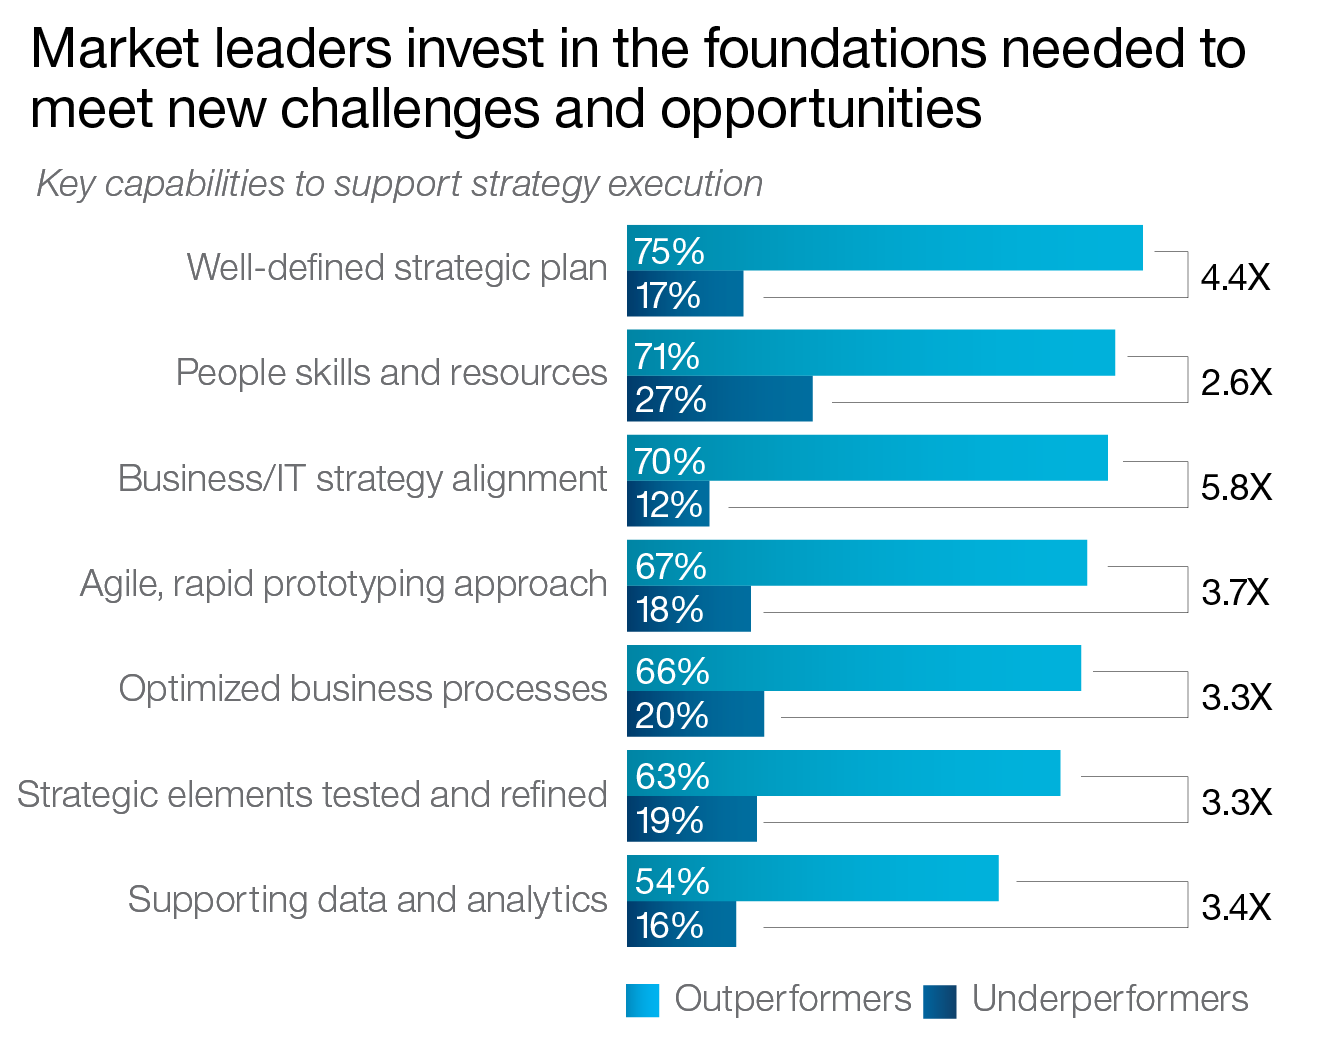 Market leaders invest in the foundations needed to meet new challenges and opportunities